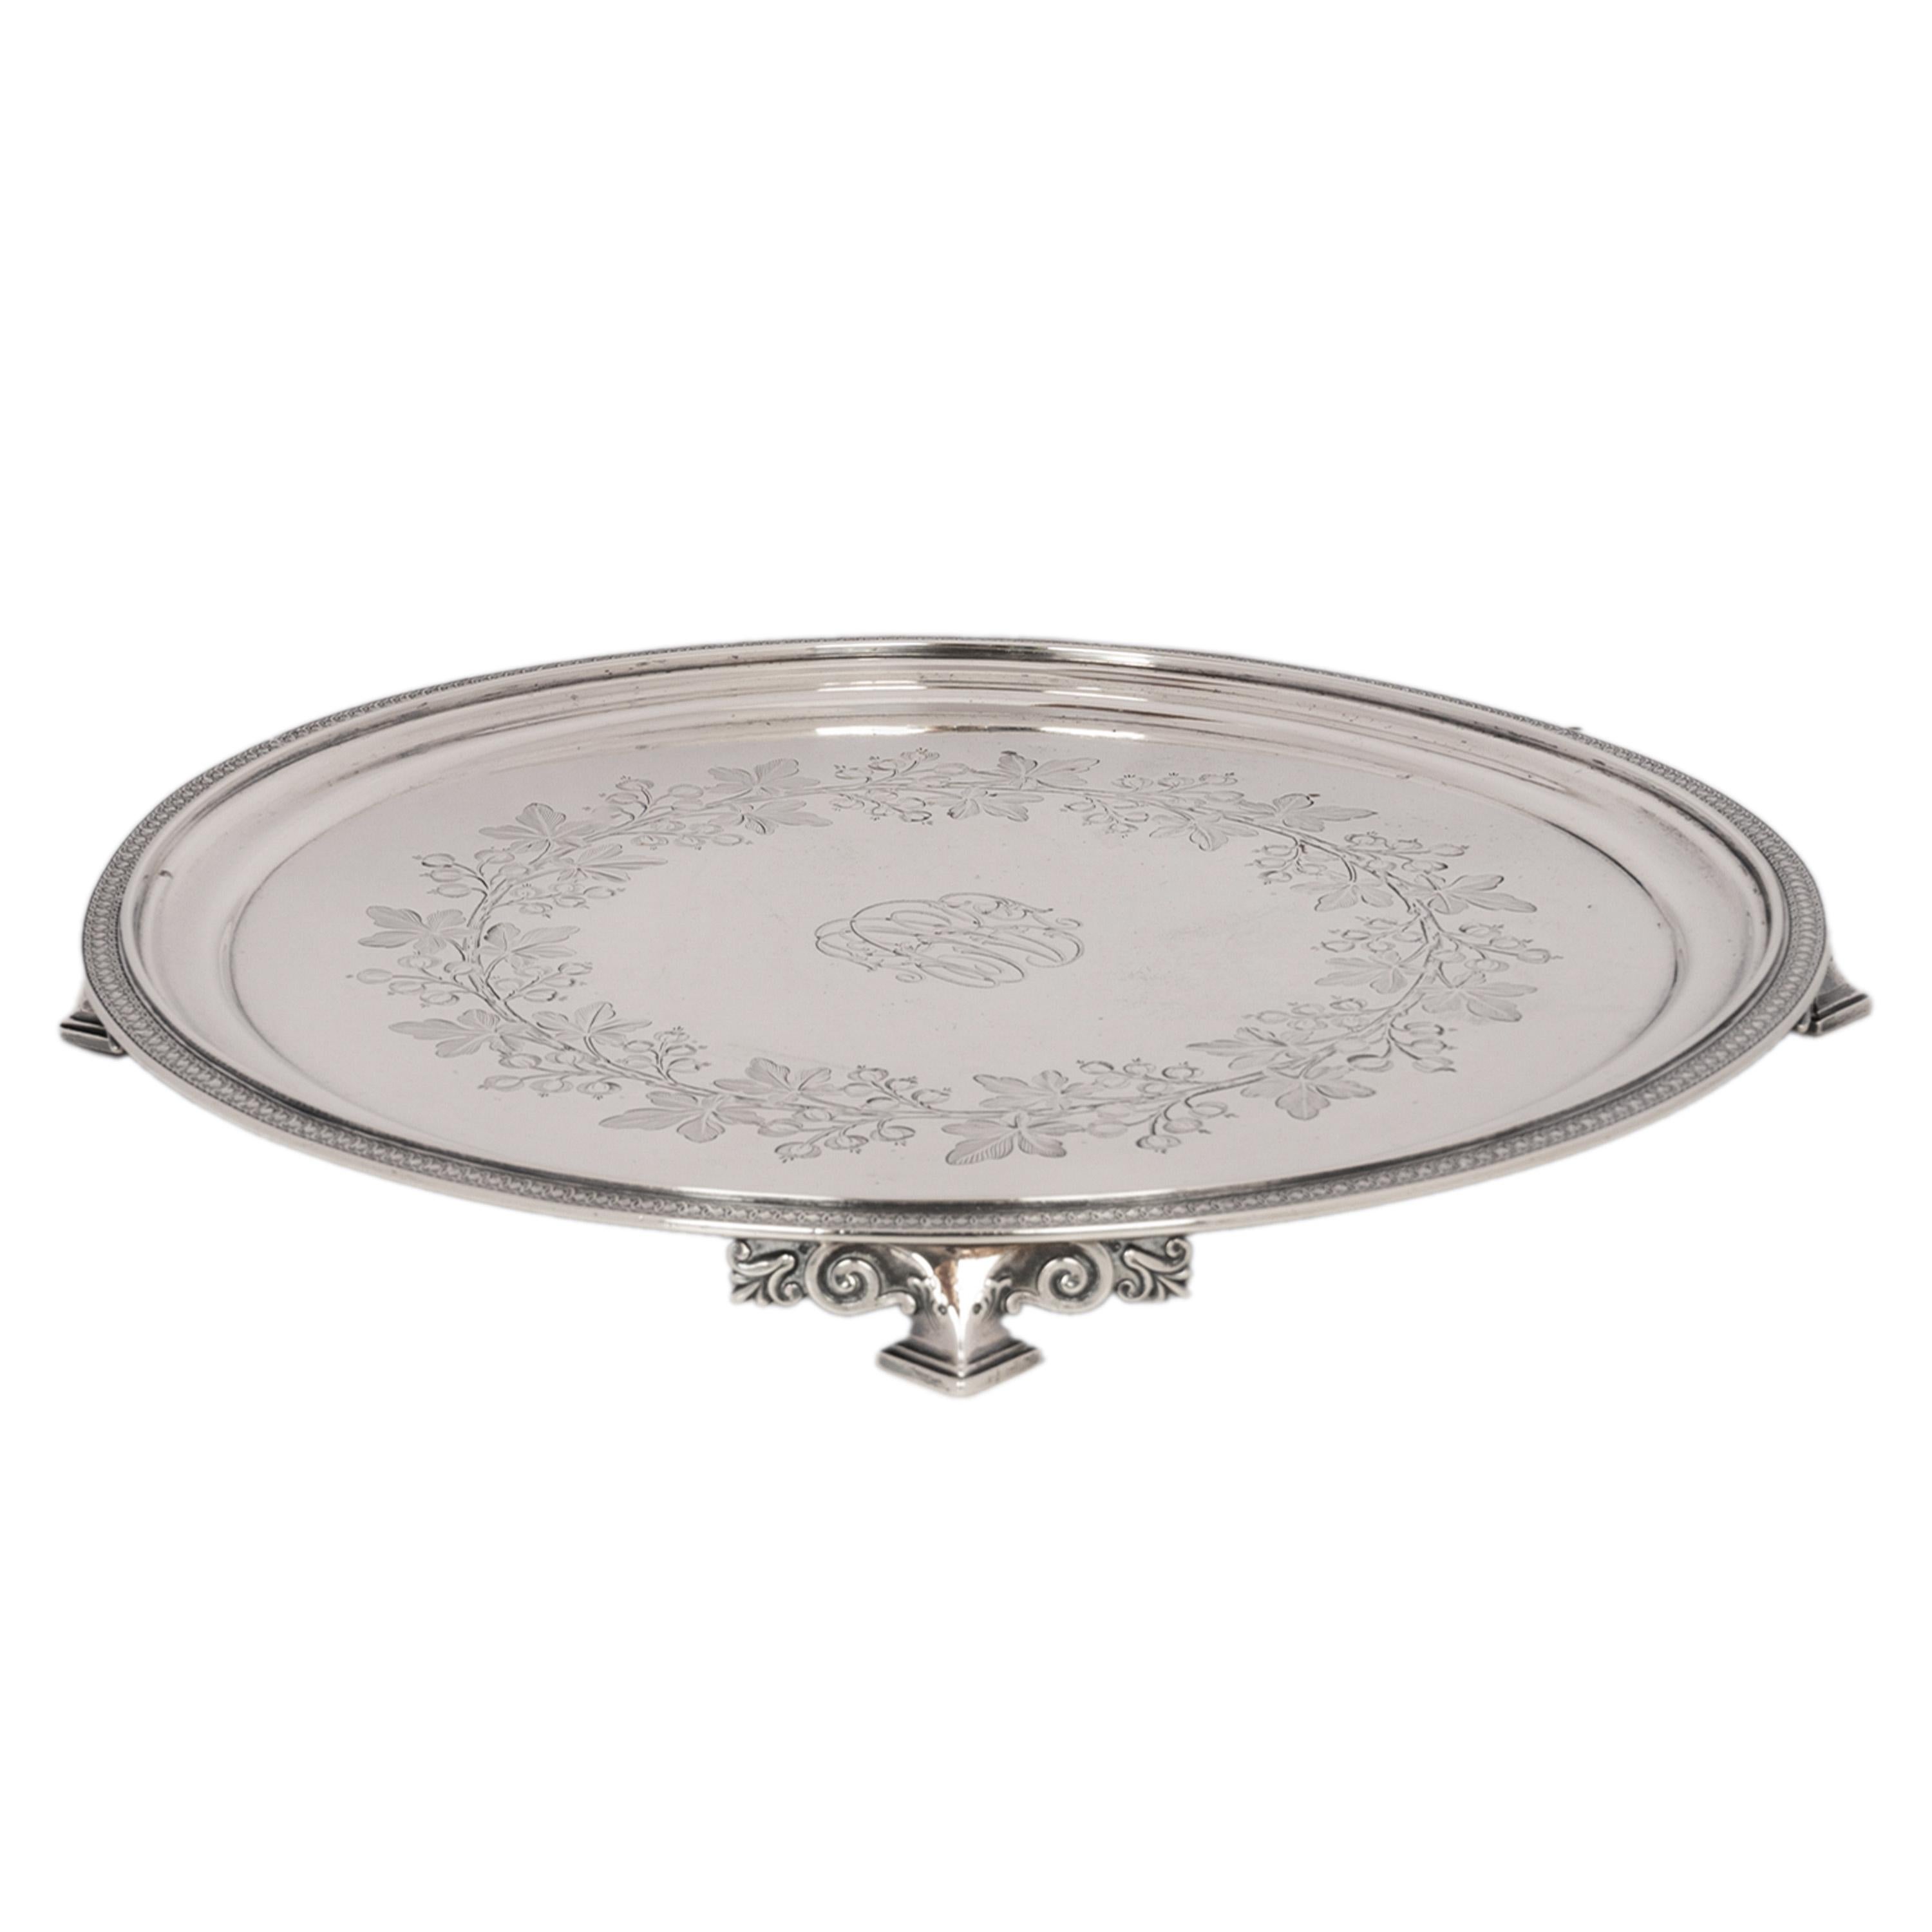 Antique Sterling Silver Graved Tiffany & Co Footed Salver Tray New York 1870 en vente 2